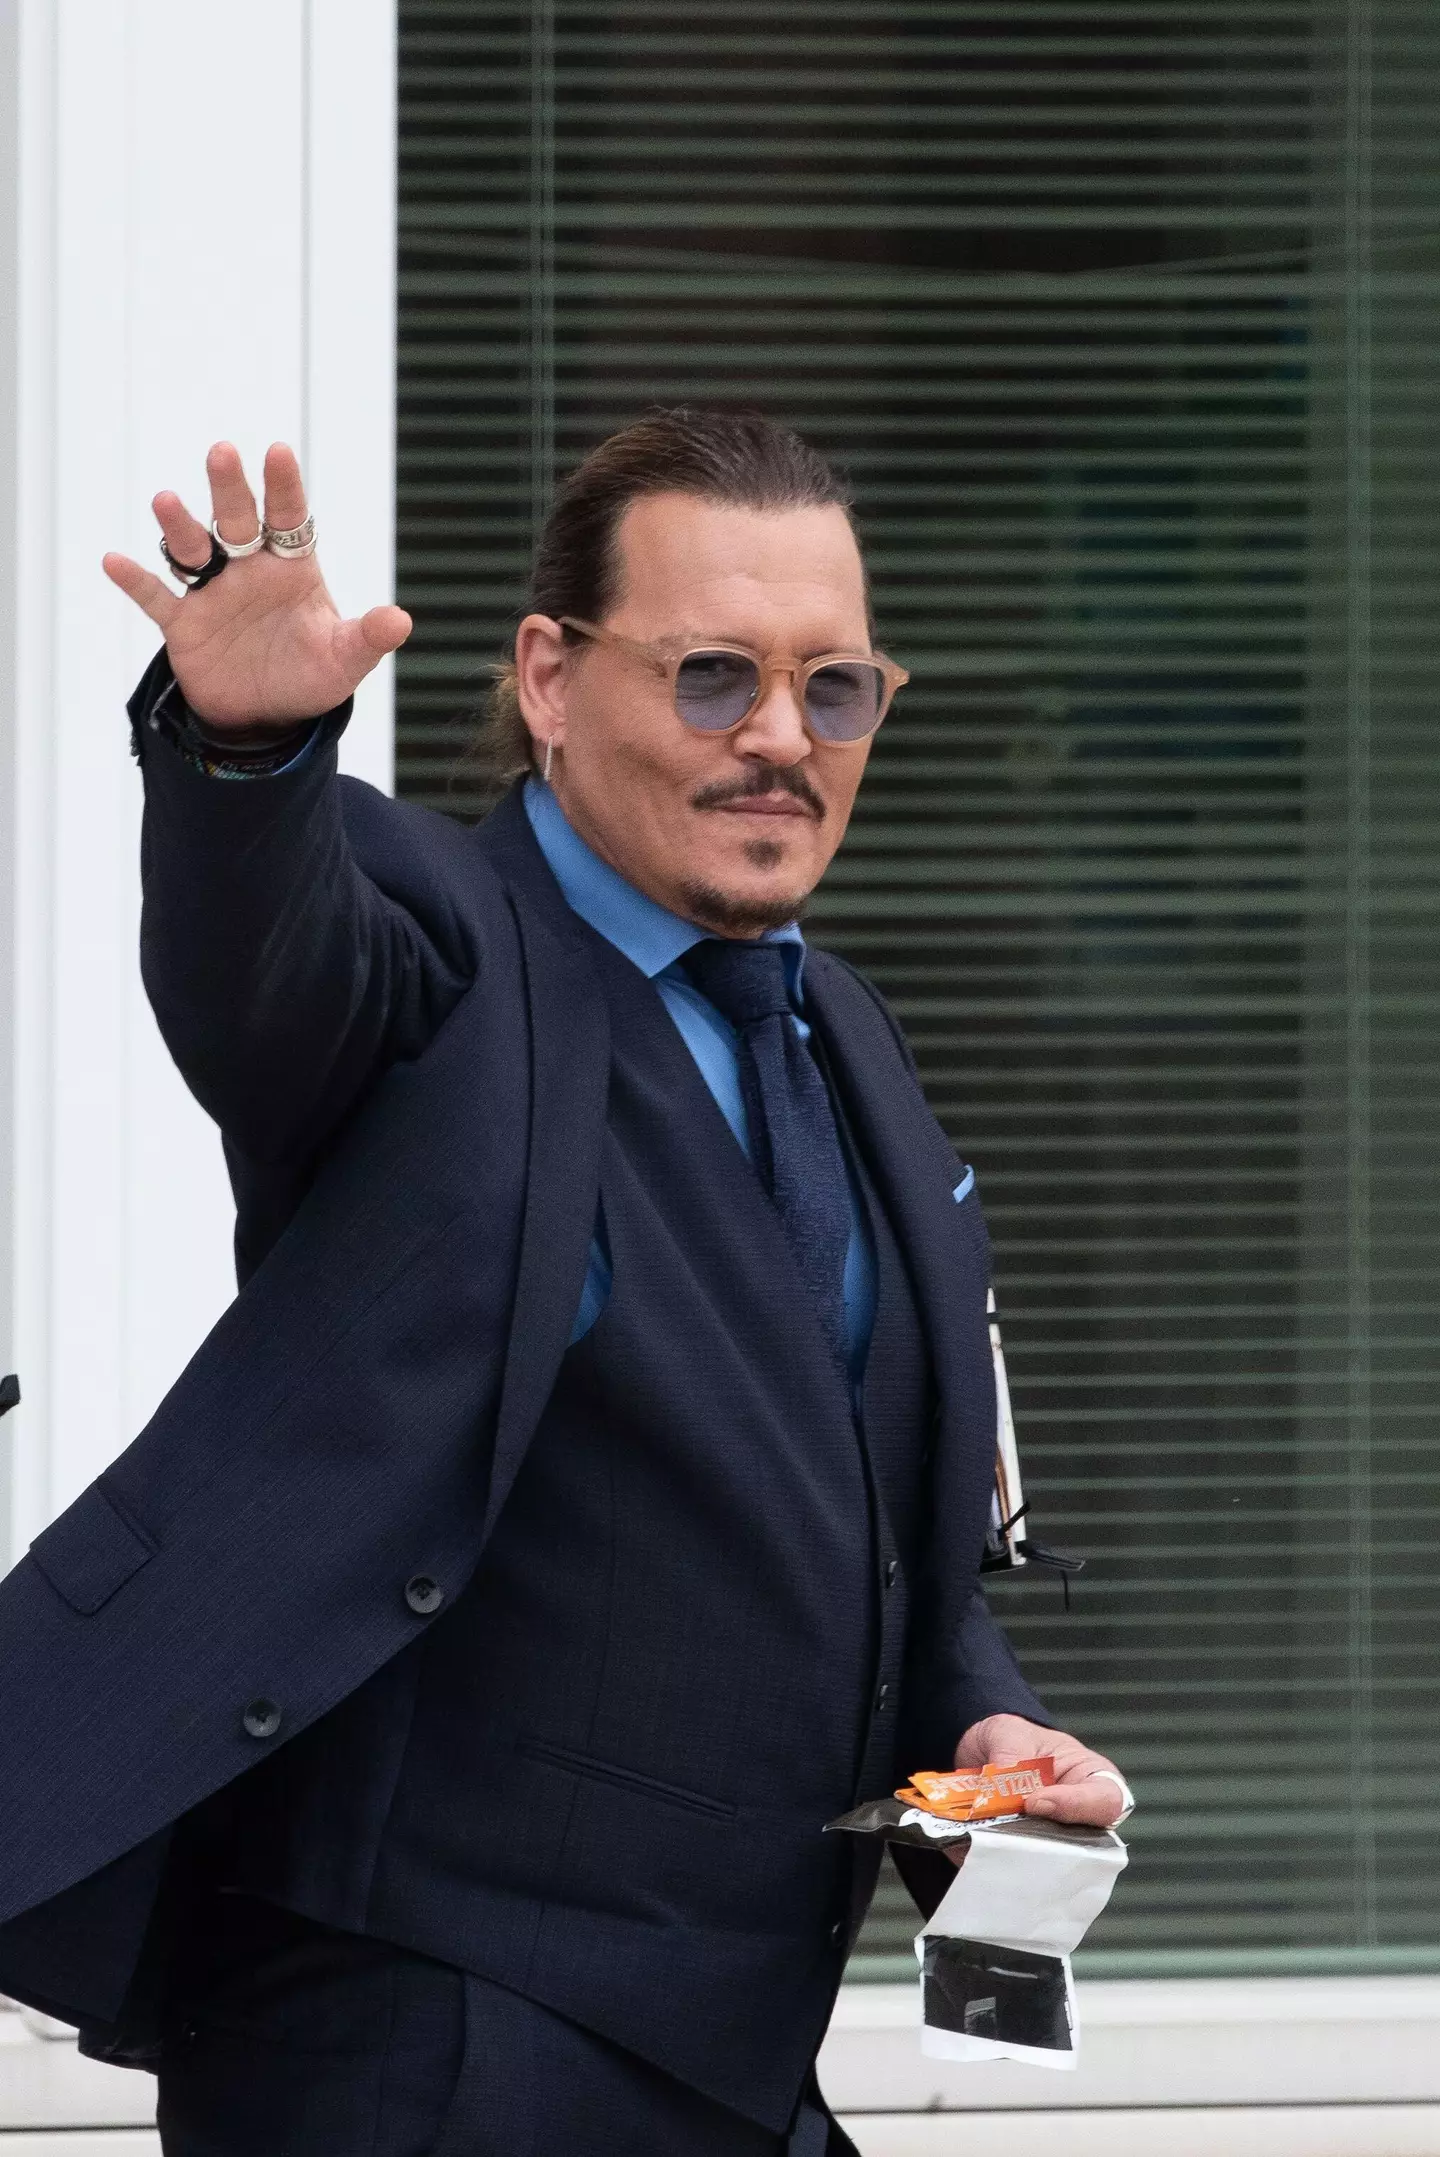 Many have been celebrating Johnny Depp's defamation trial win.